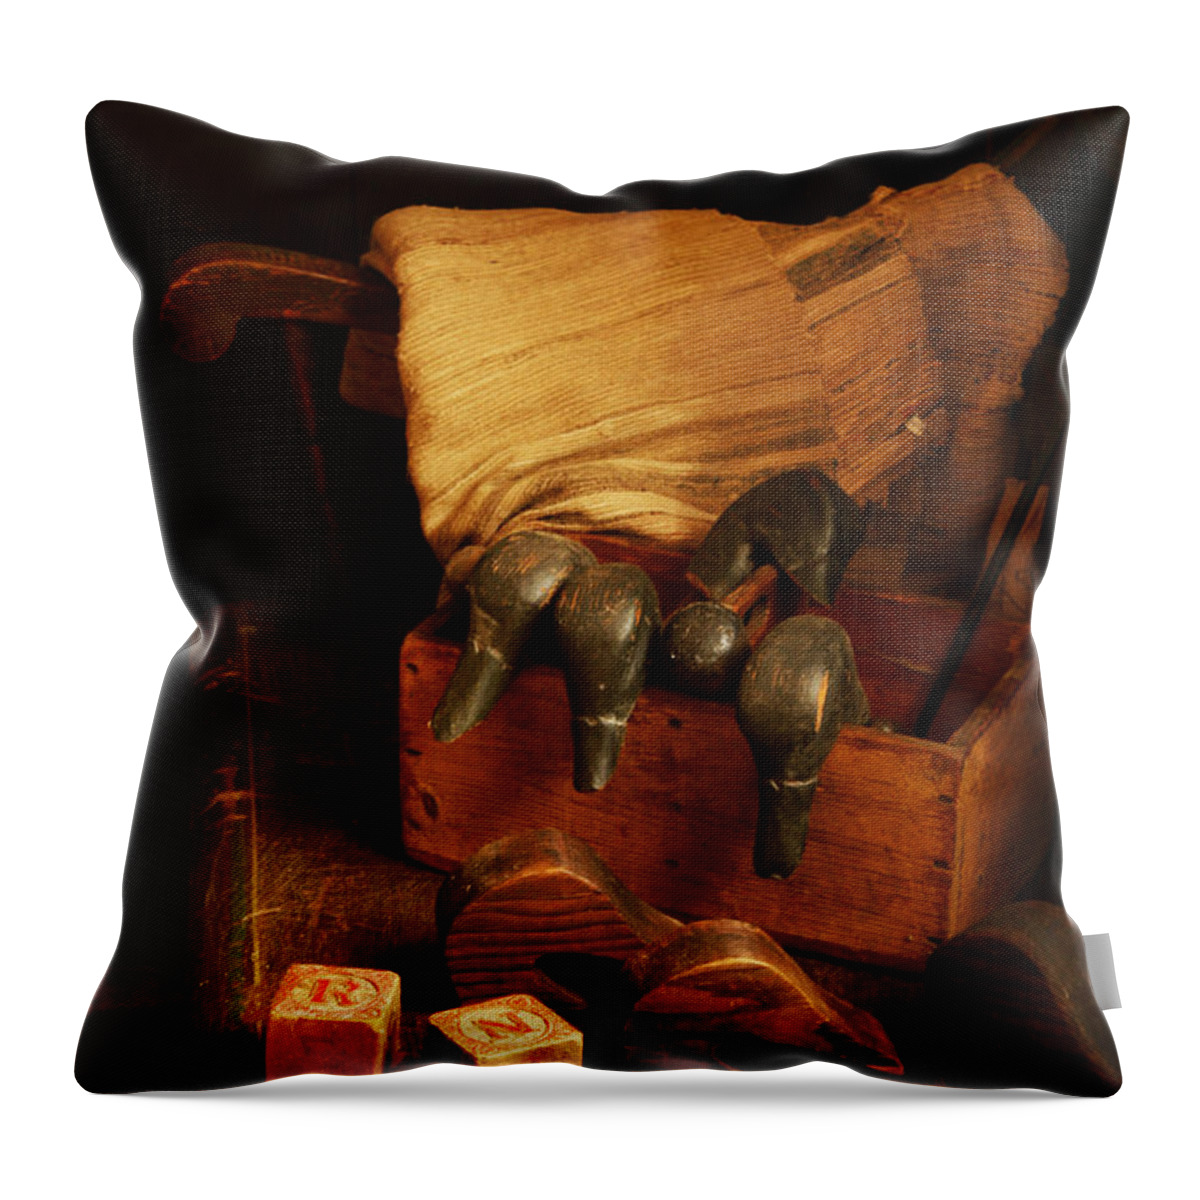 Still Life Throw Pillow featuring the photograph Antique by Kristia Adams